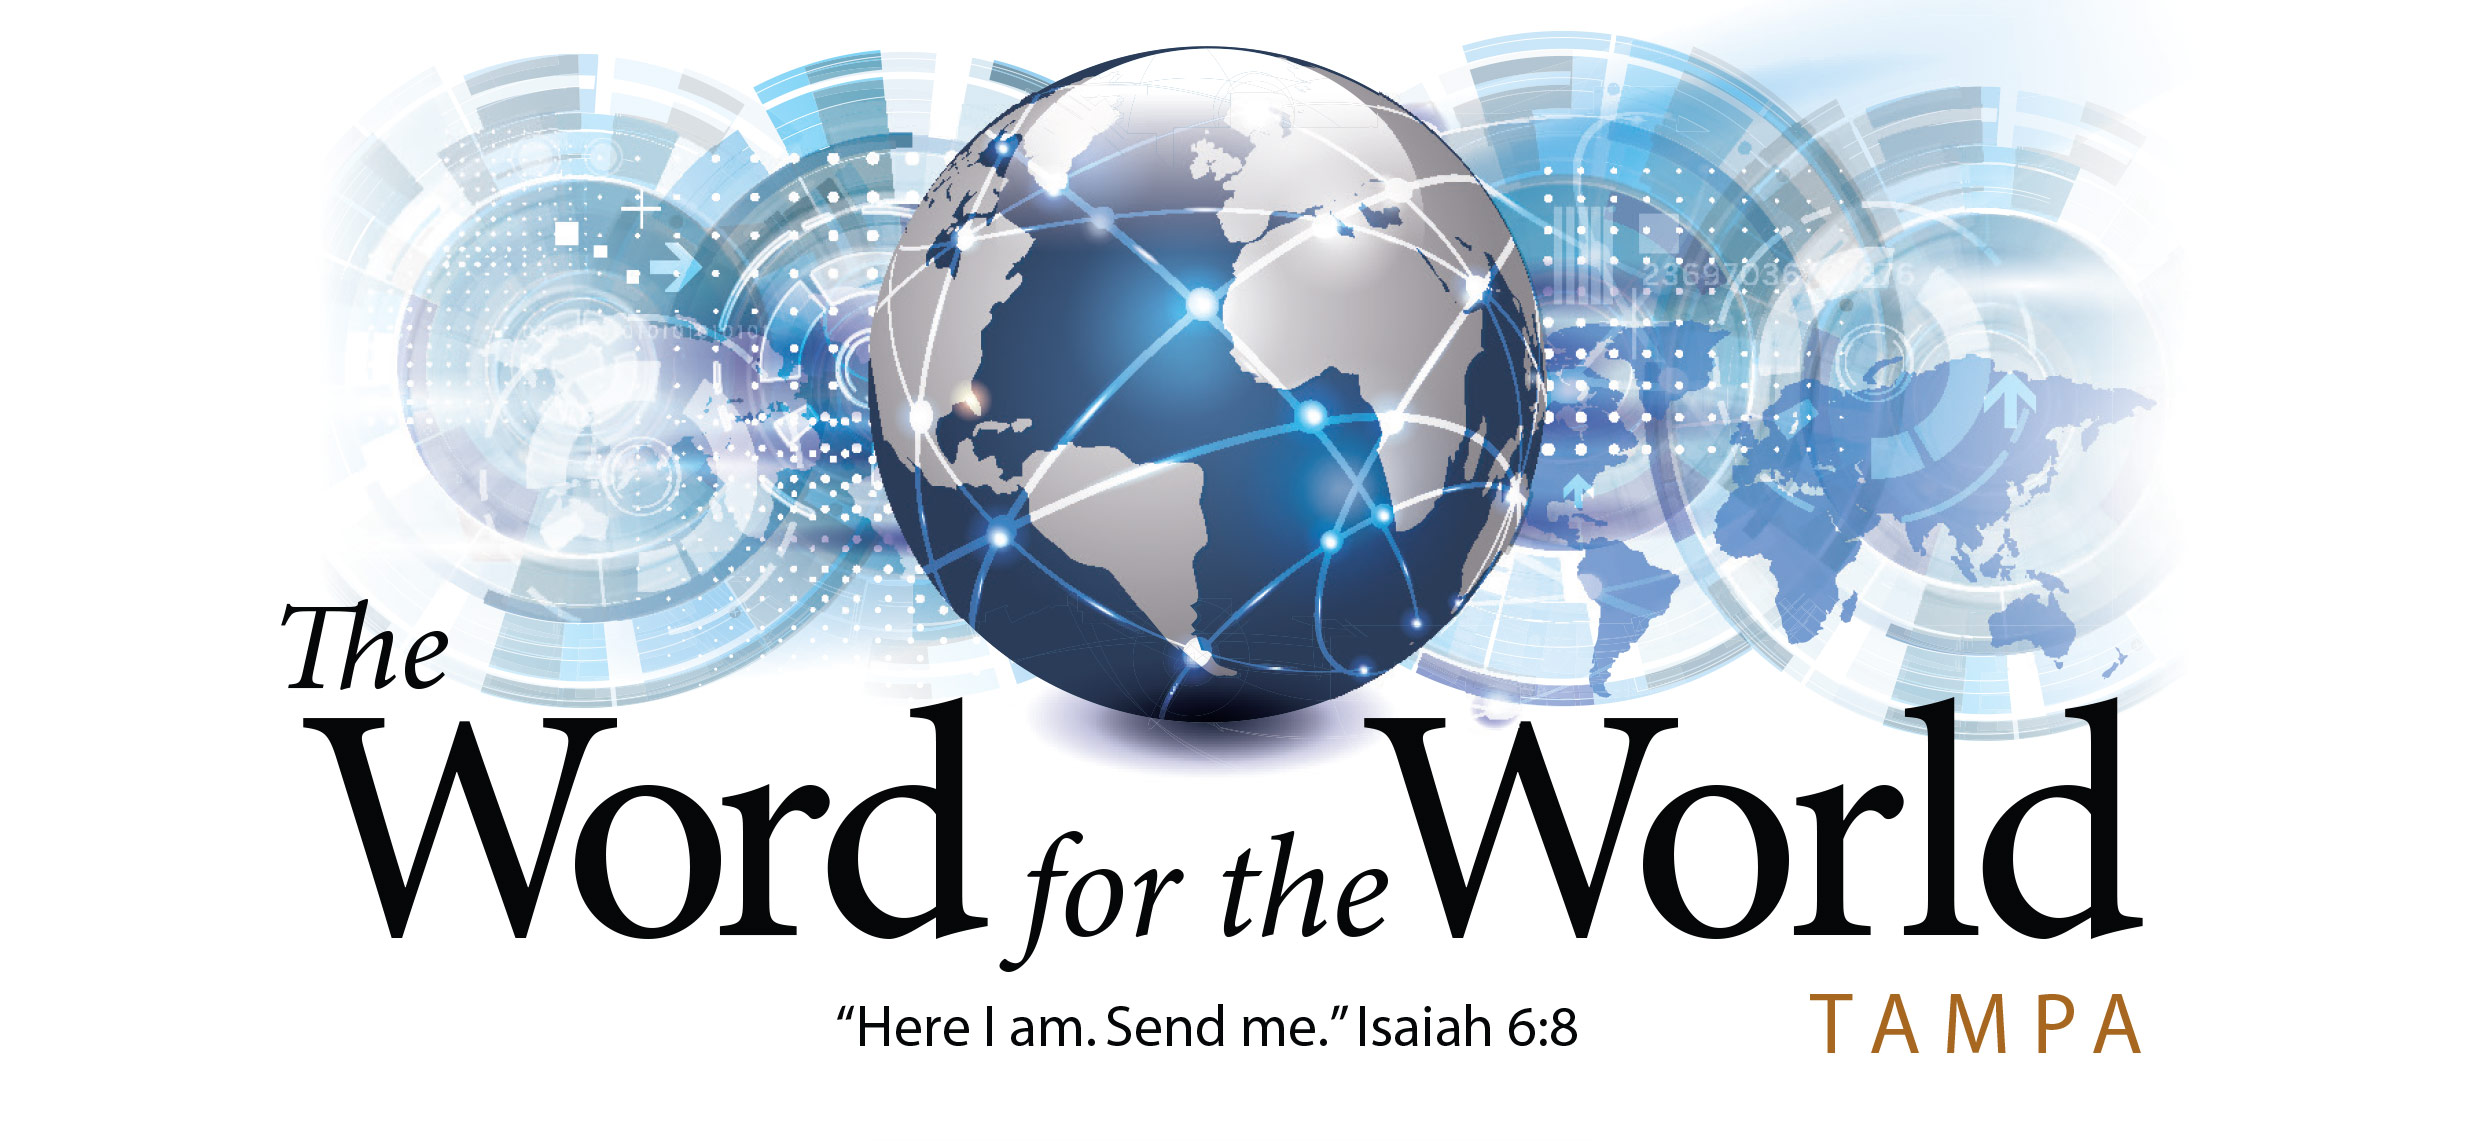 The Word for the World